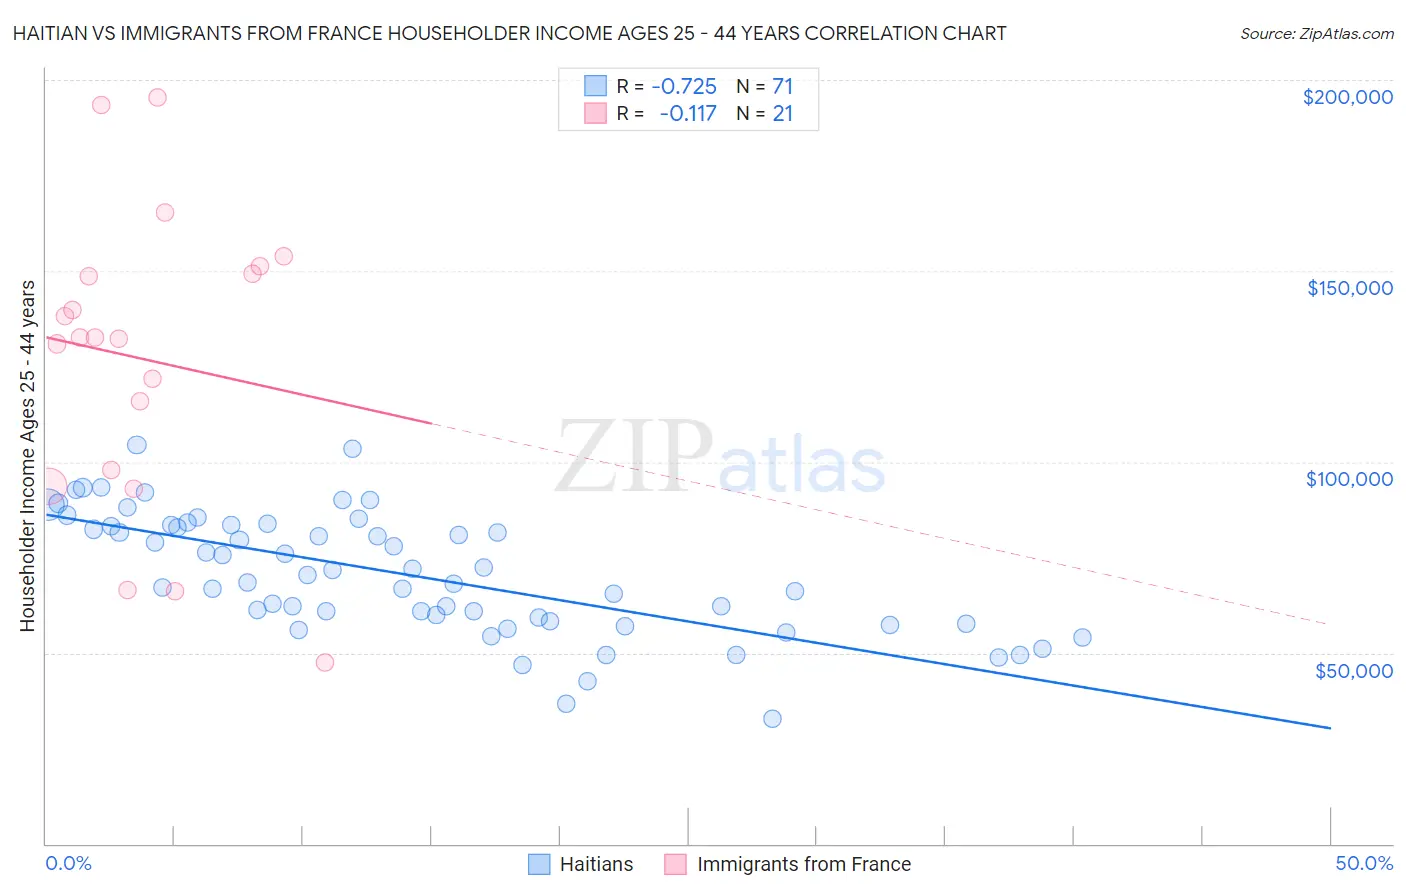 Haitian vs Immigrants from France Householder Income Ages 25 - 44 years